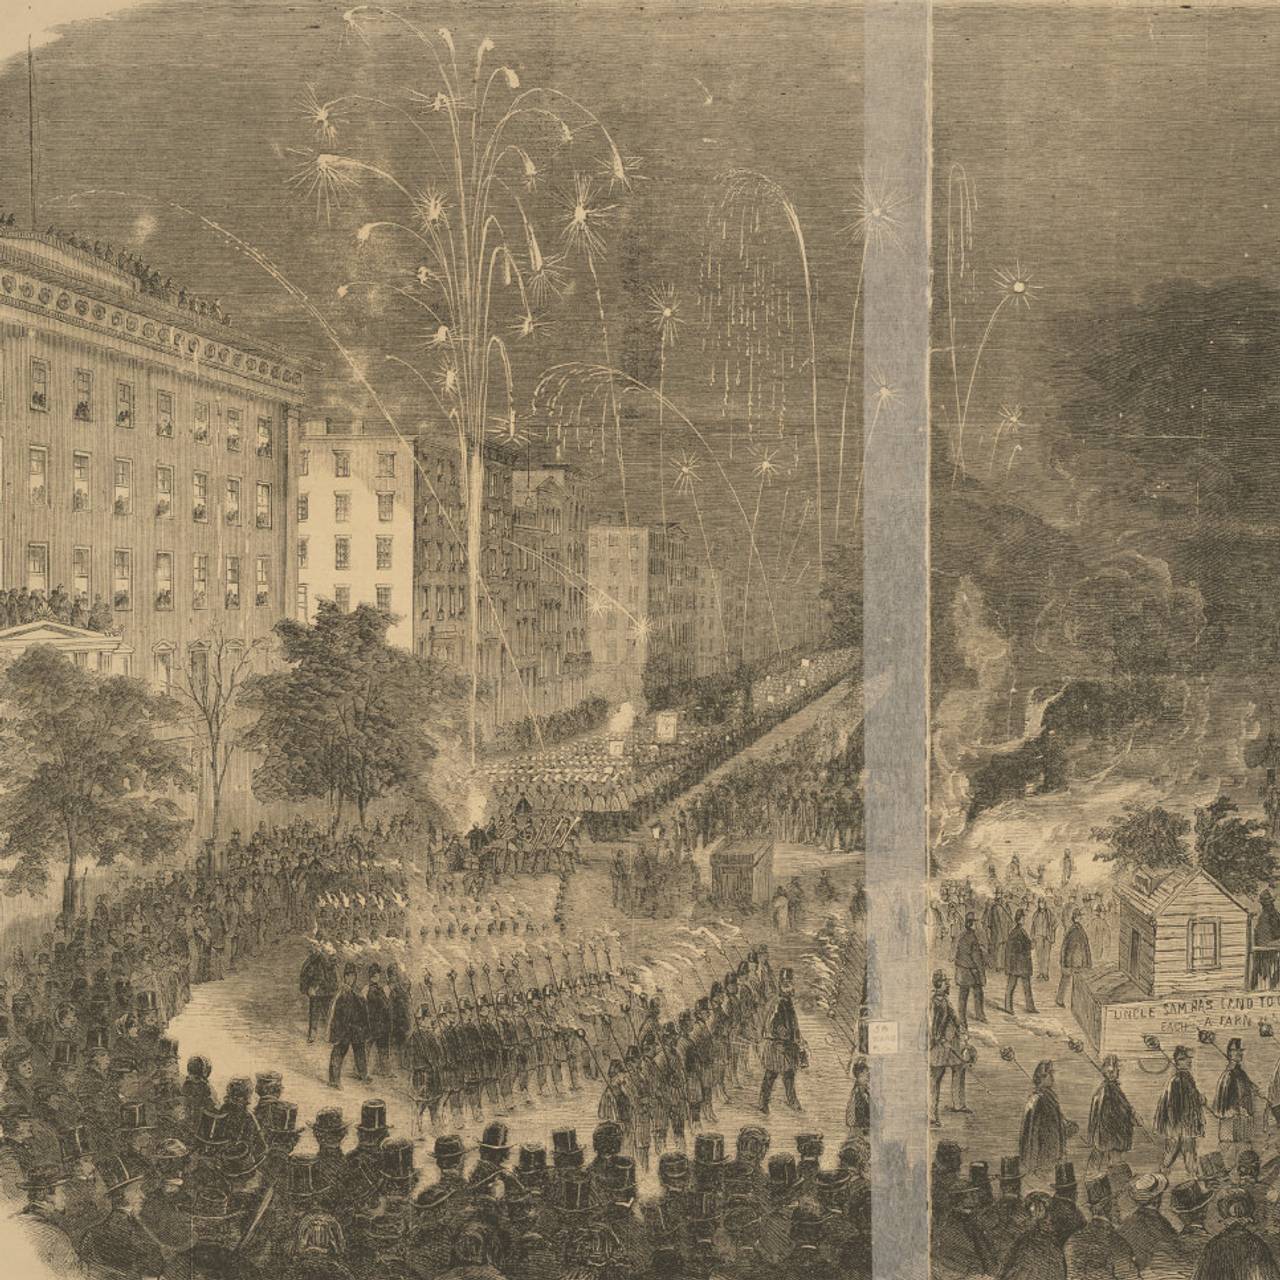 Fra rundt 1860: 

Grand Torchlight Procession of the Wide-Awake Clubs in the City of New York